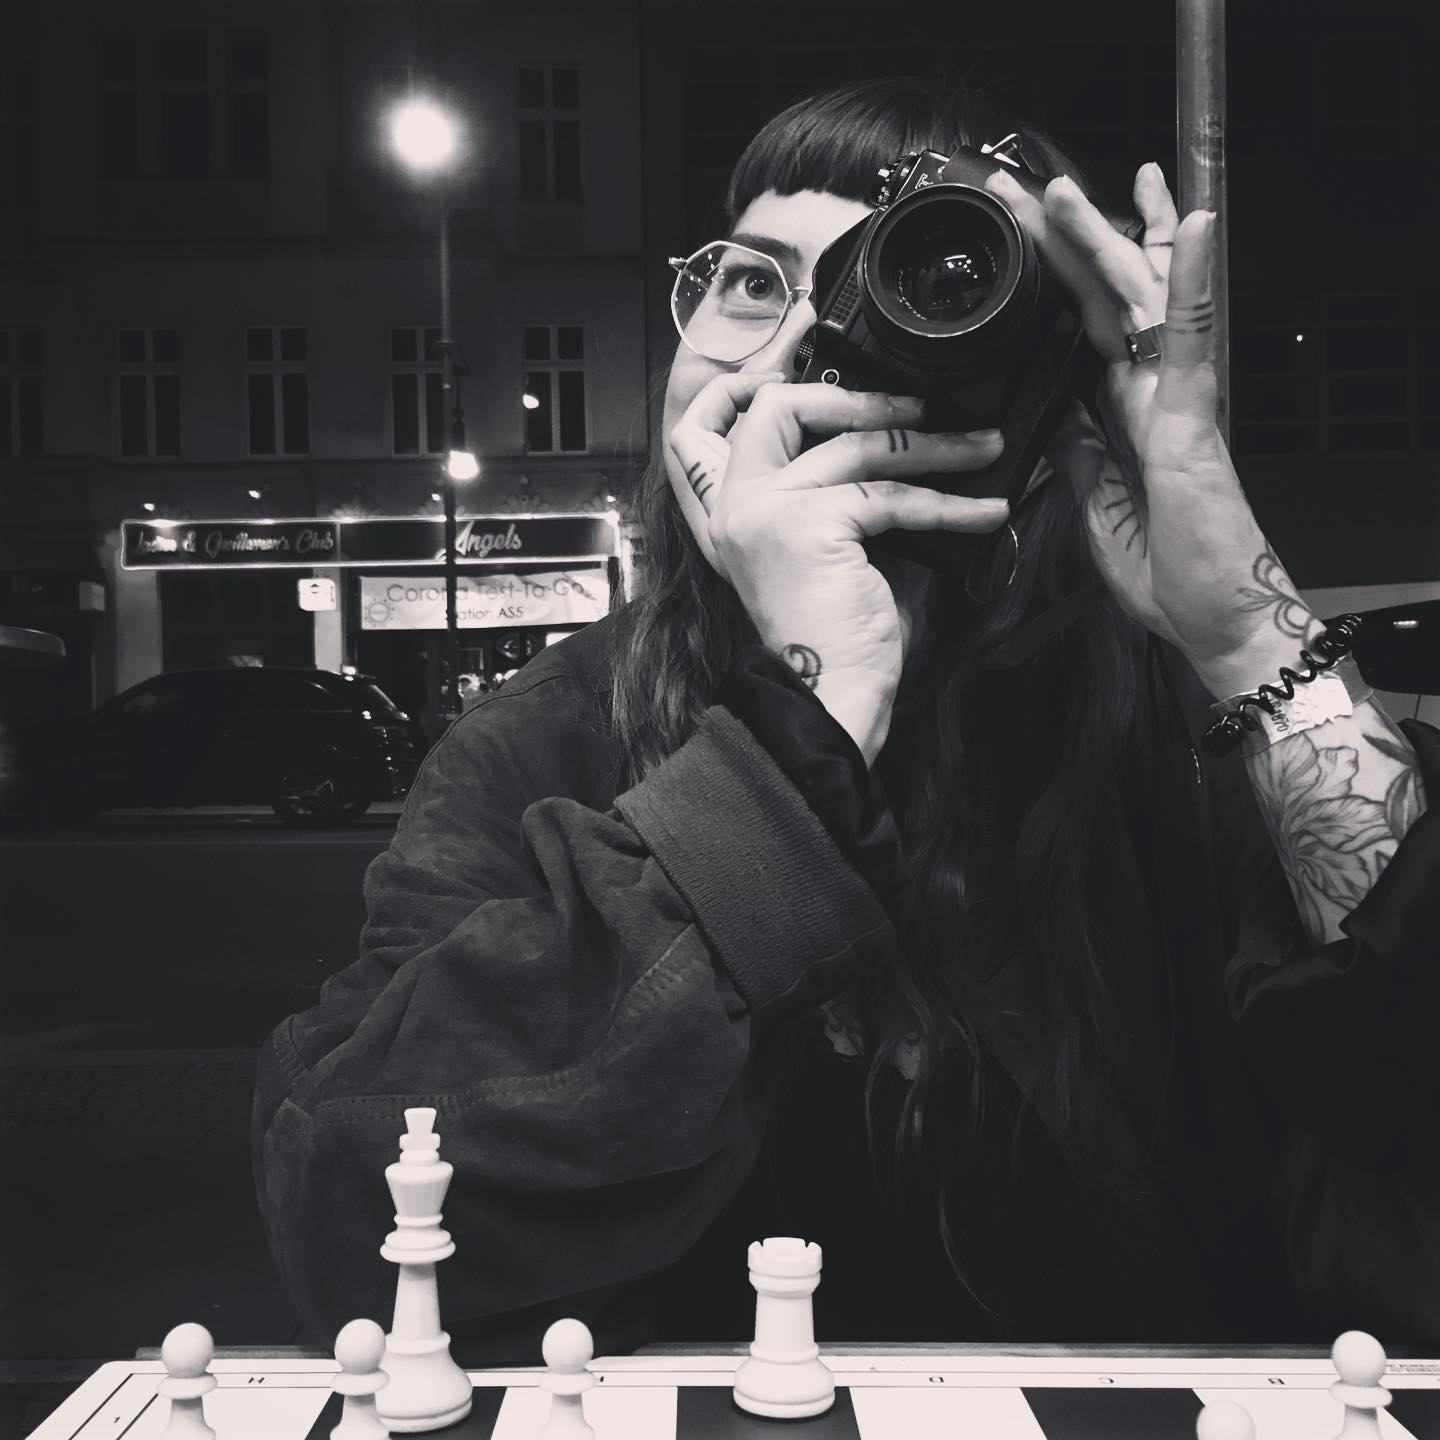 A girl sitting at the chess board holding up her photo camera